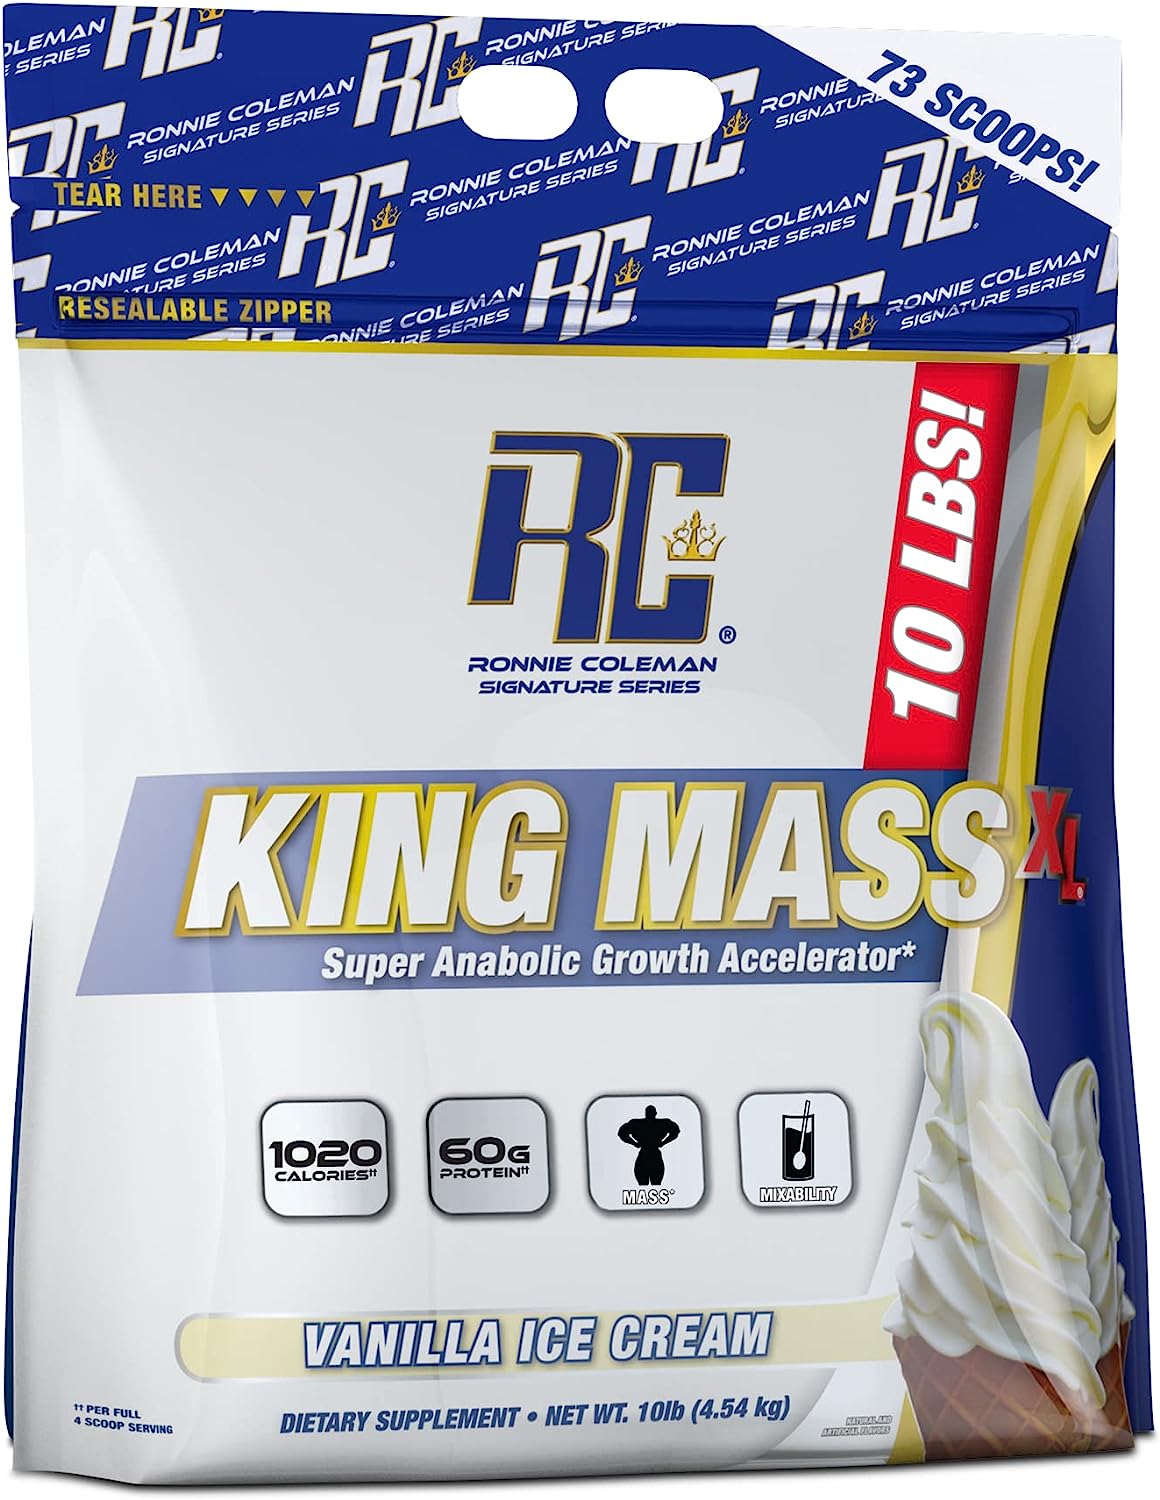 Ronnie Coleman Signature Series King Mass XL Mass Gainer Protein Powder, Weight and Muscle Gainer, 60g Protein, 180g Carbohydrates, 1,000+ Calories, Creatine and Glutamine, Vanilla Ice Cream, 10 lb